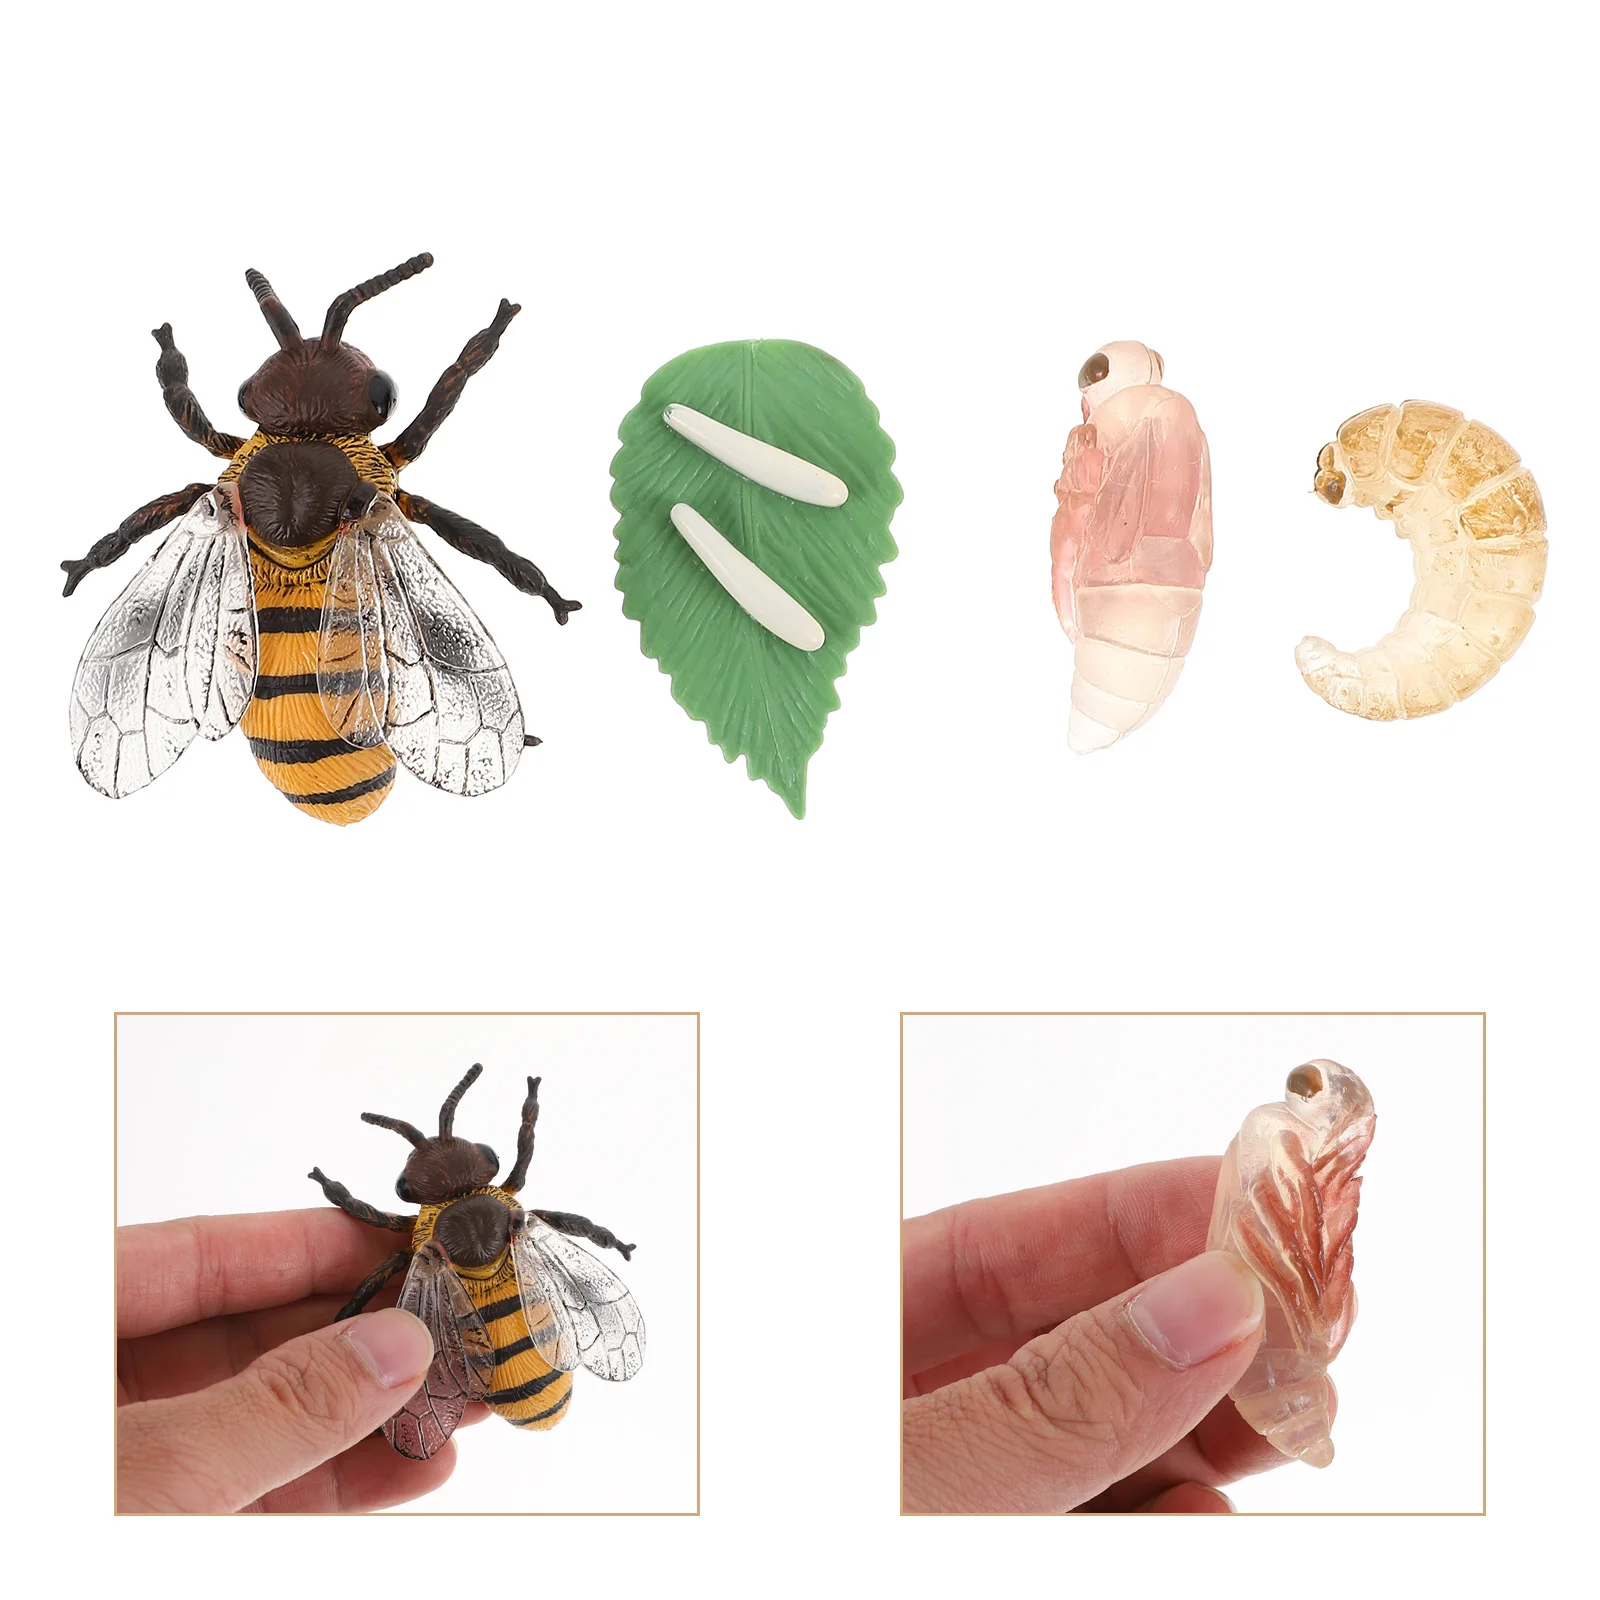 

Stag Beetle Growth Week Small Animal Toys Insect Prank Honey Simulation Model Figurines Fake Plastic Cycle Student Life Models